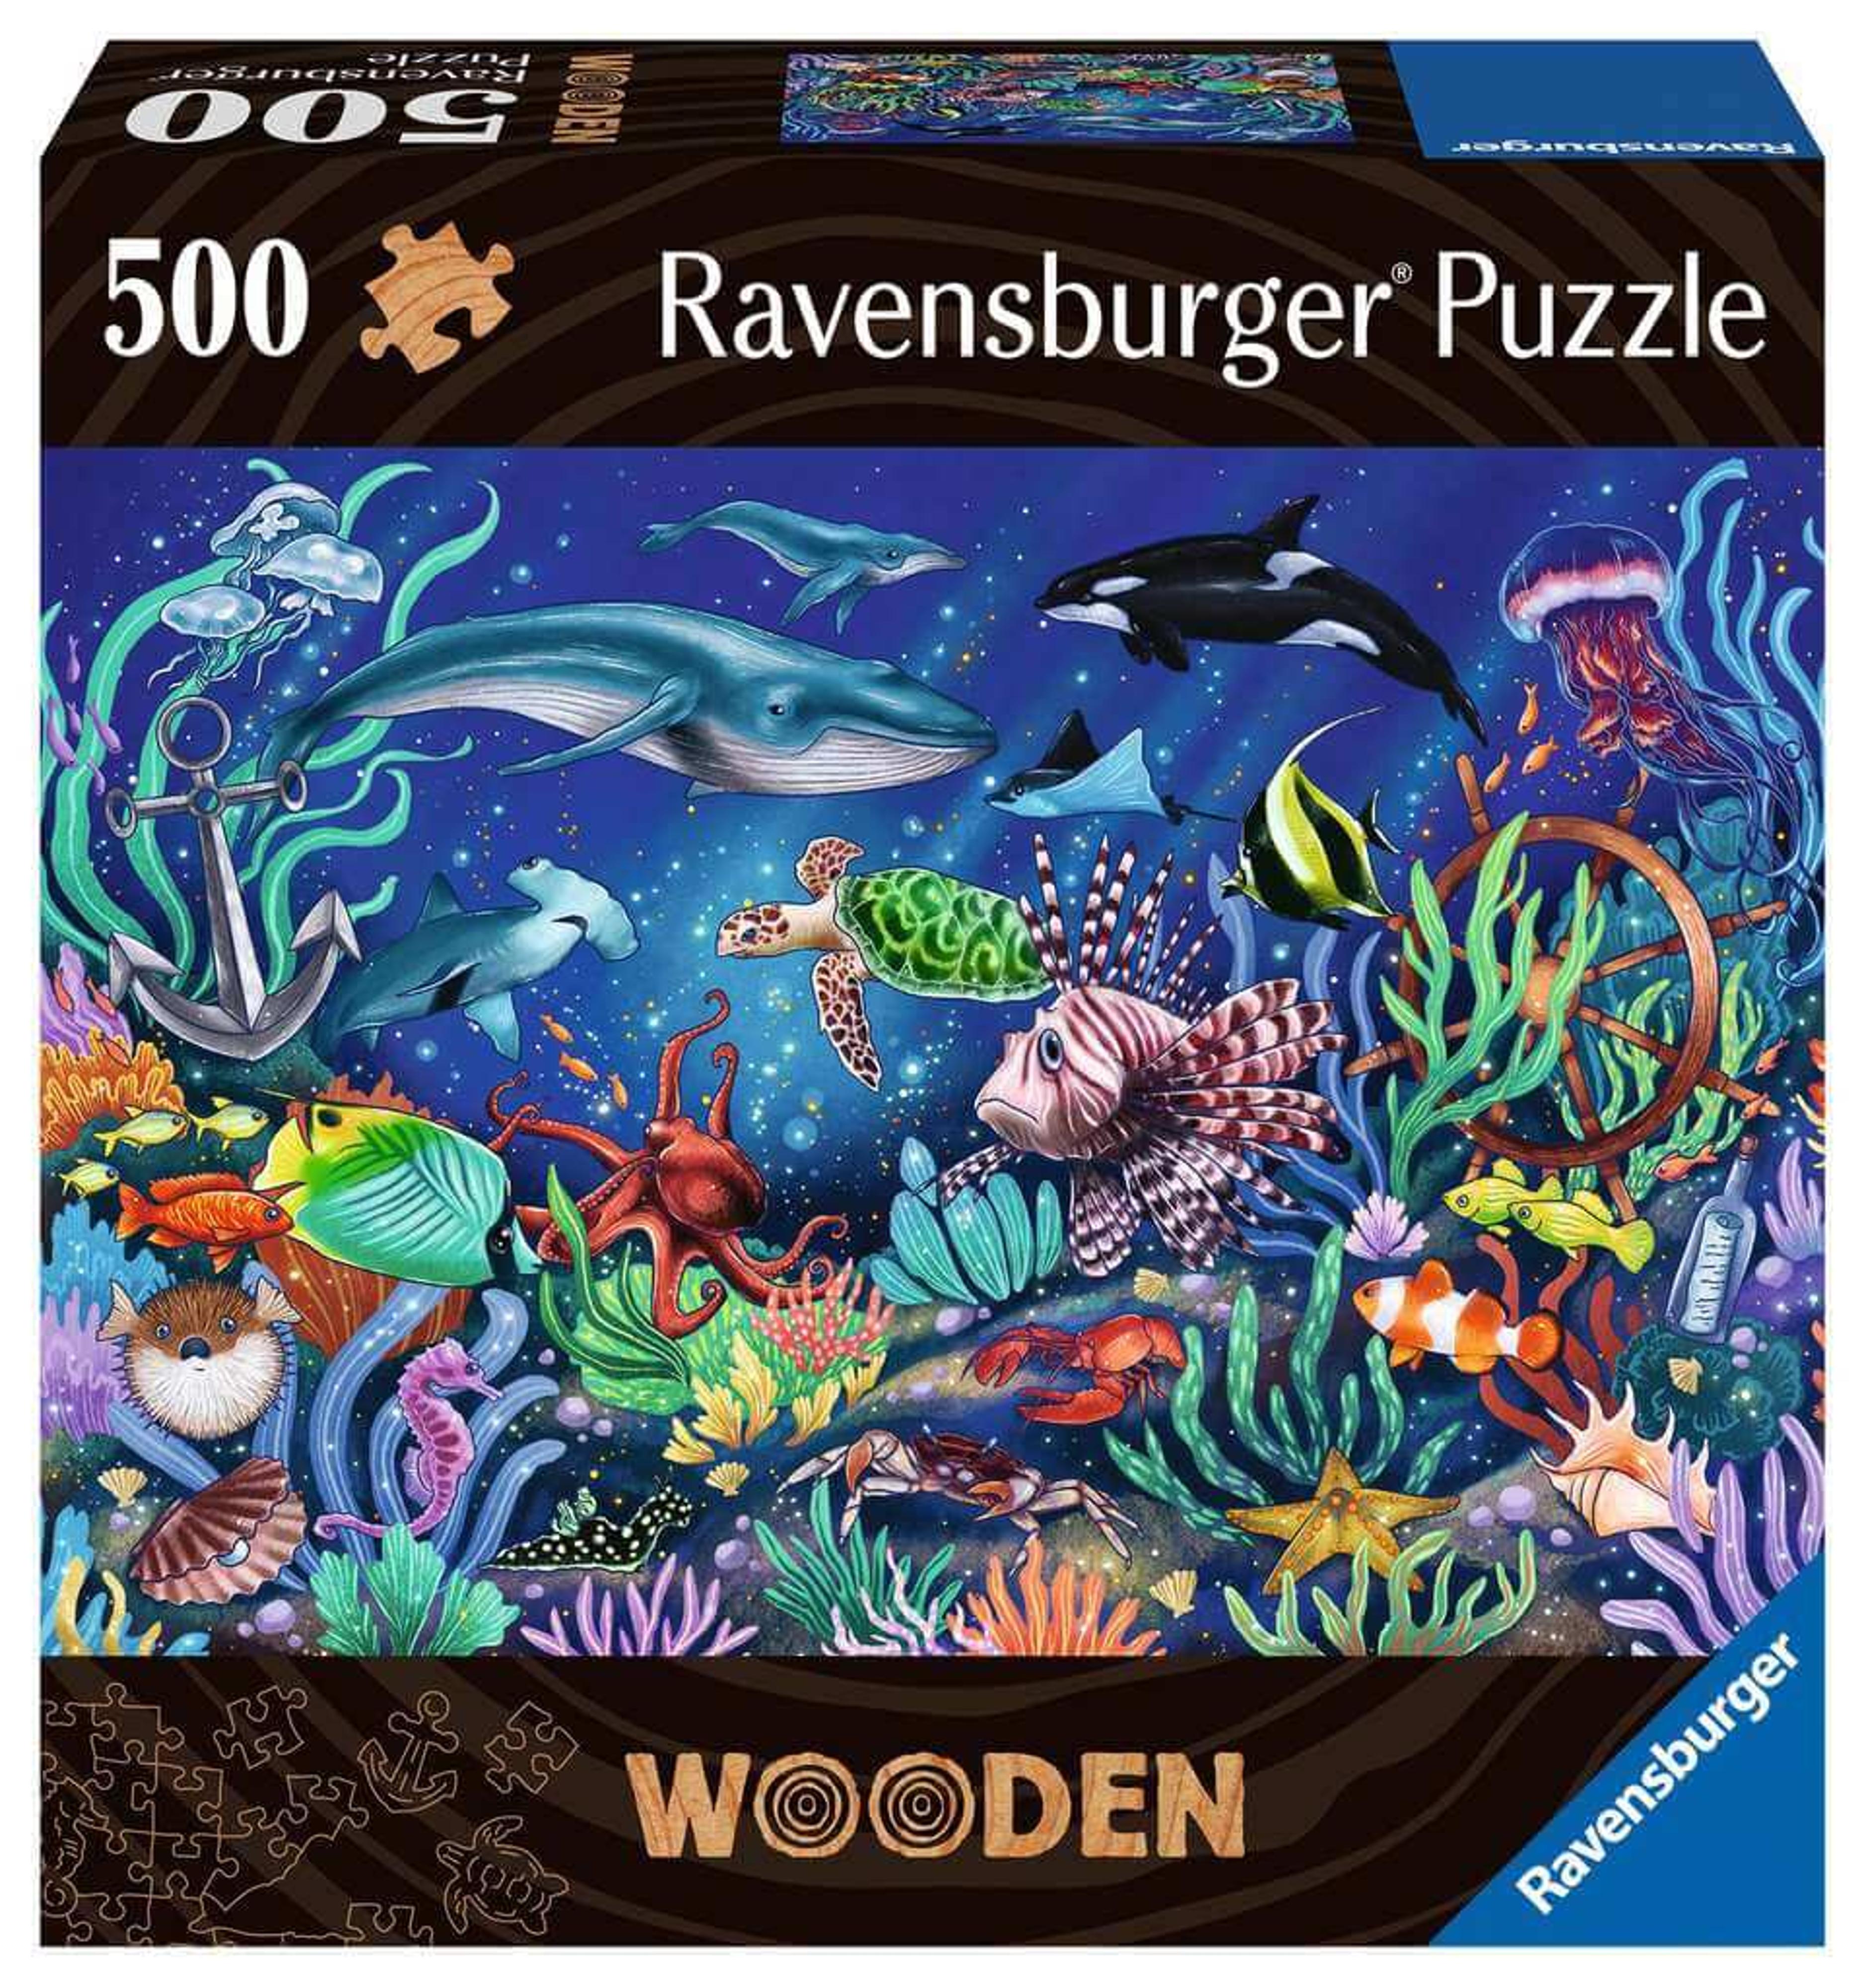 Ravensburger Under the Sea 500pc Wooden Puzzle